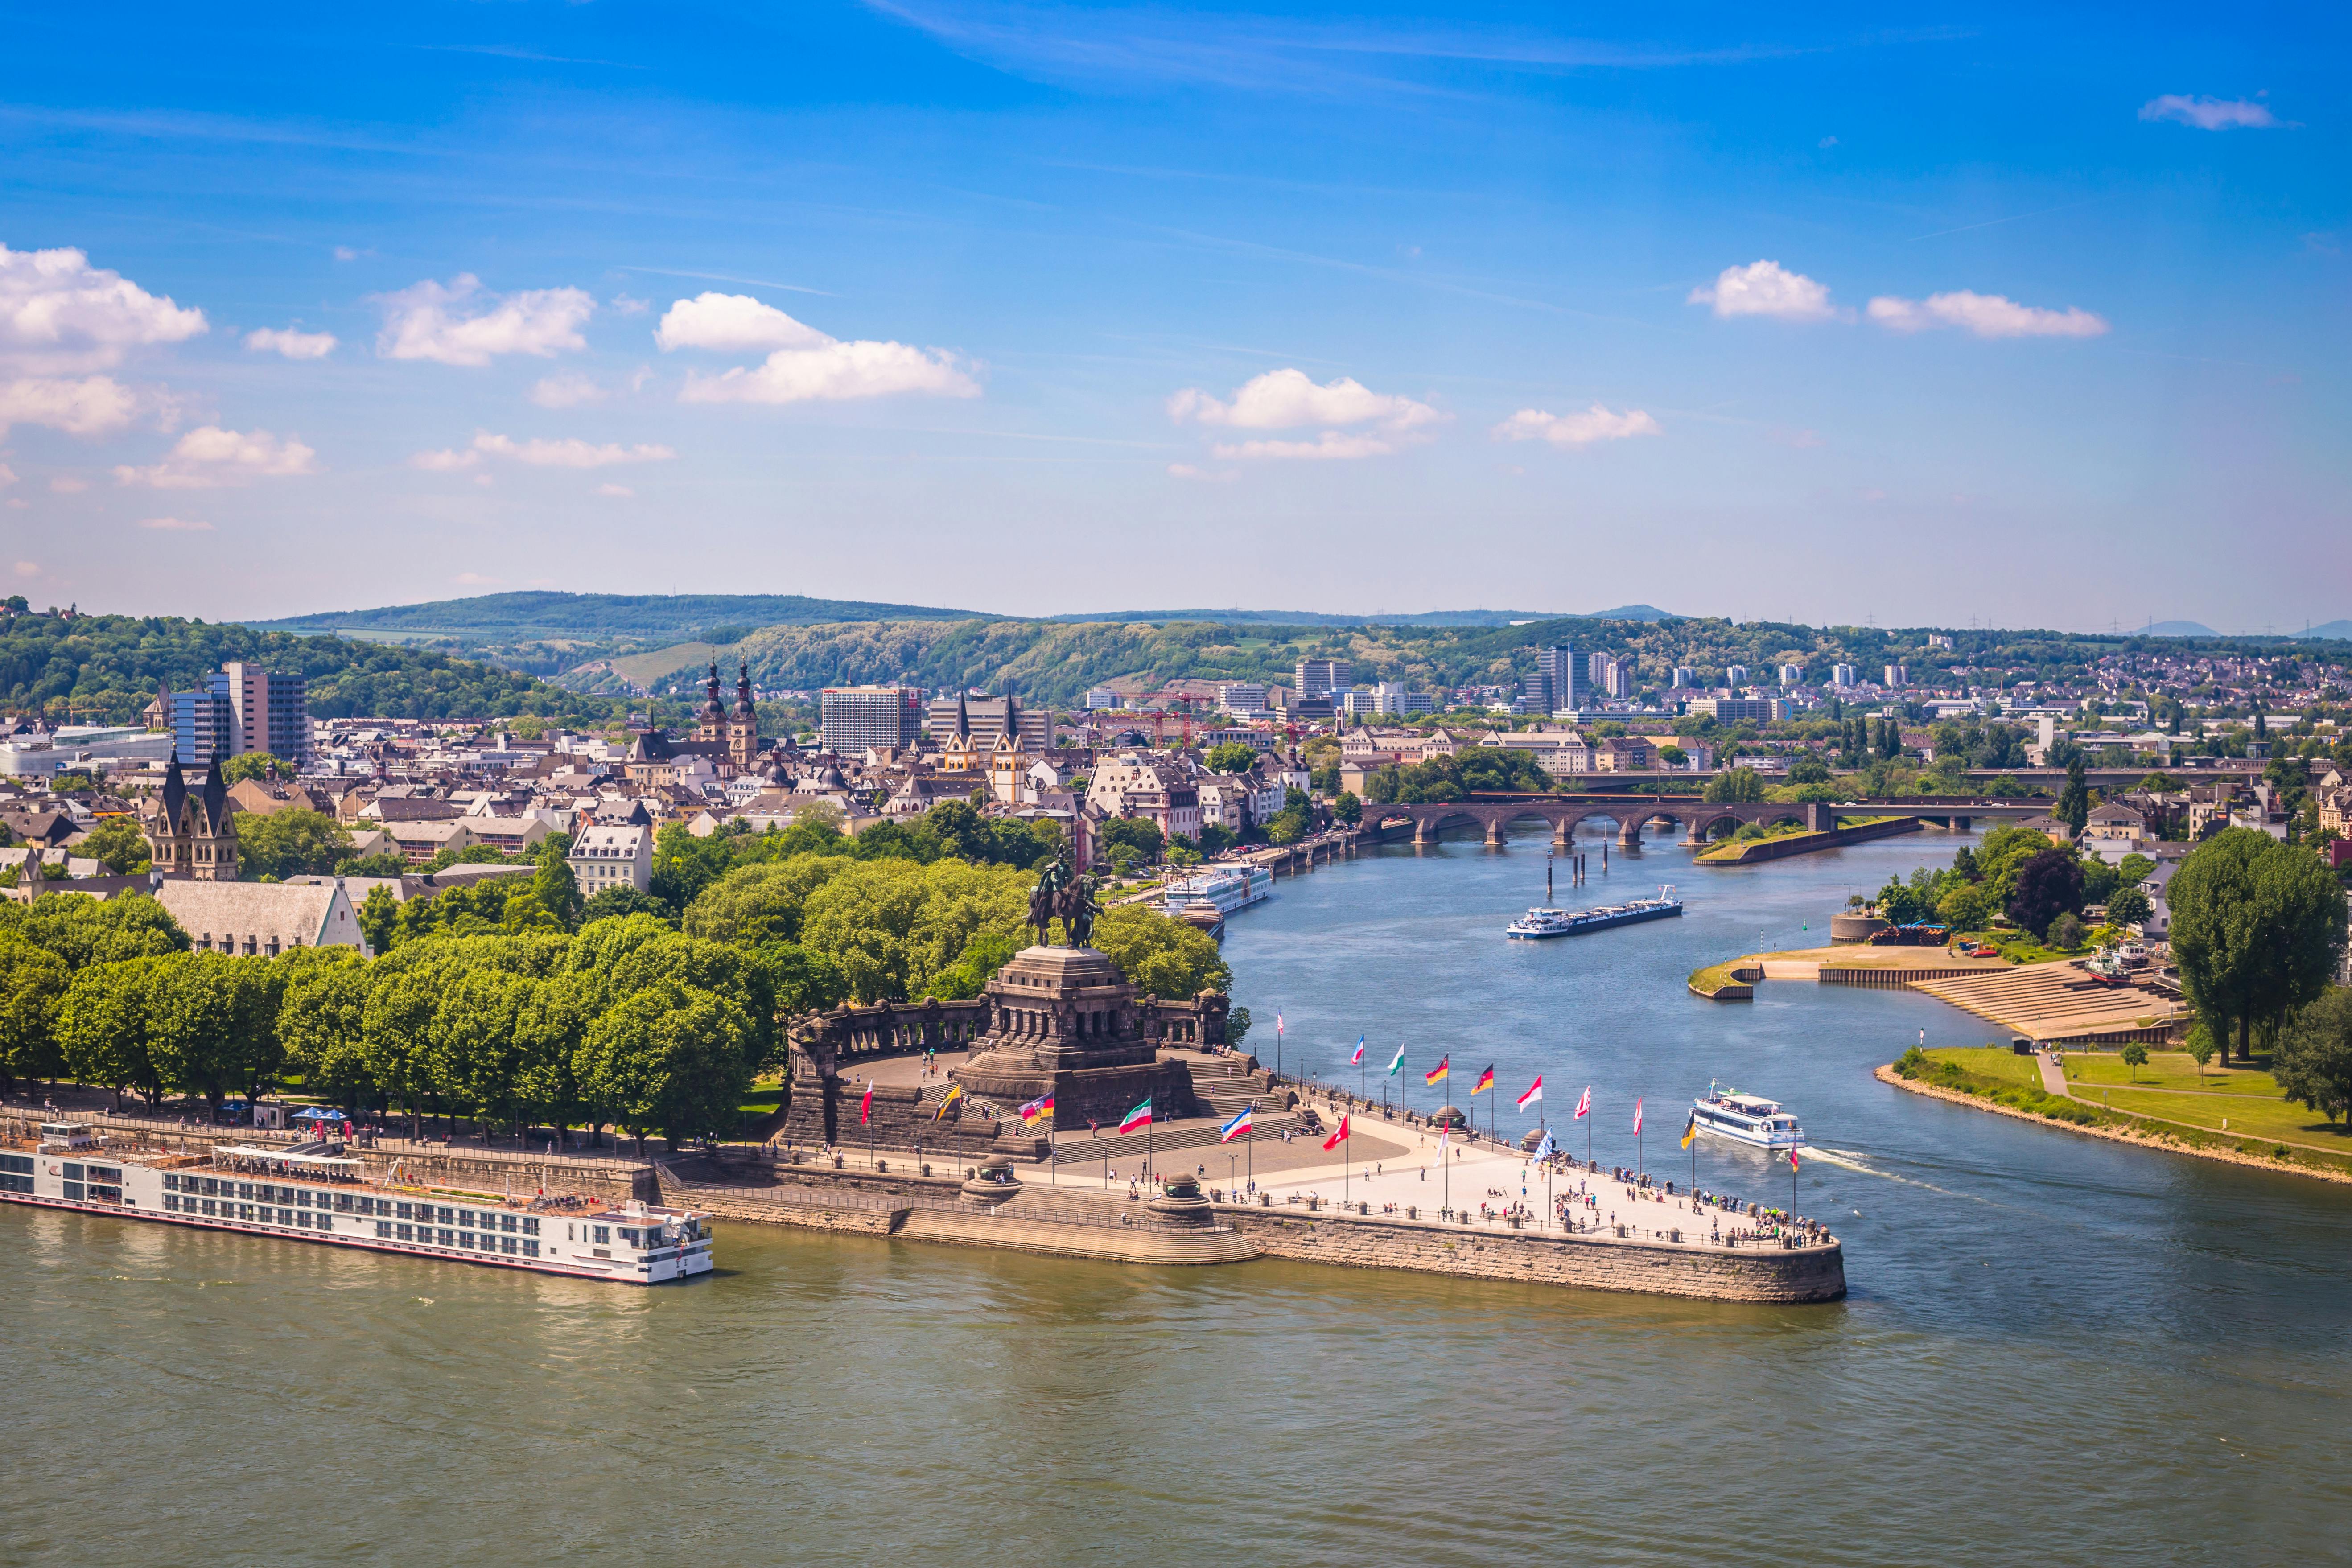 River Cruises Collection: Walking Tour of Koblenz